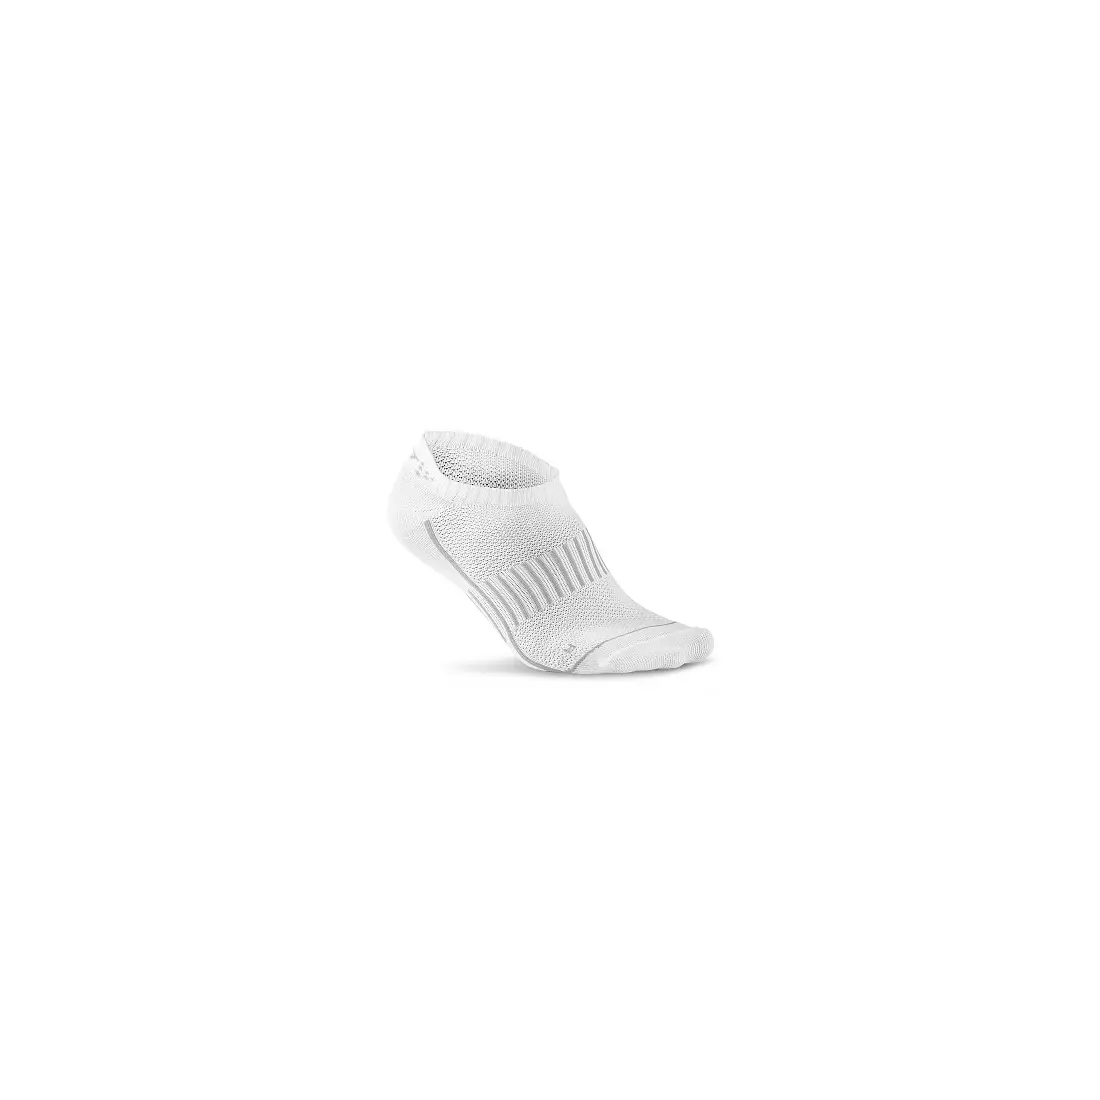 CRAFT STAY COOL sports socks, 2-pack, 1903429-2900